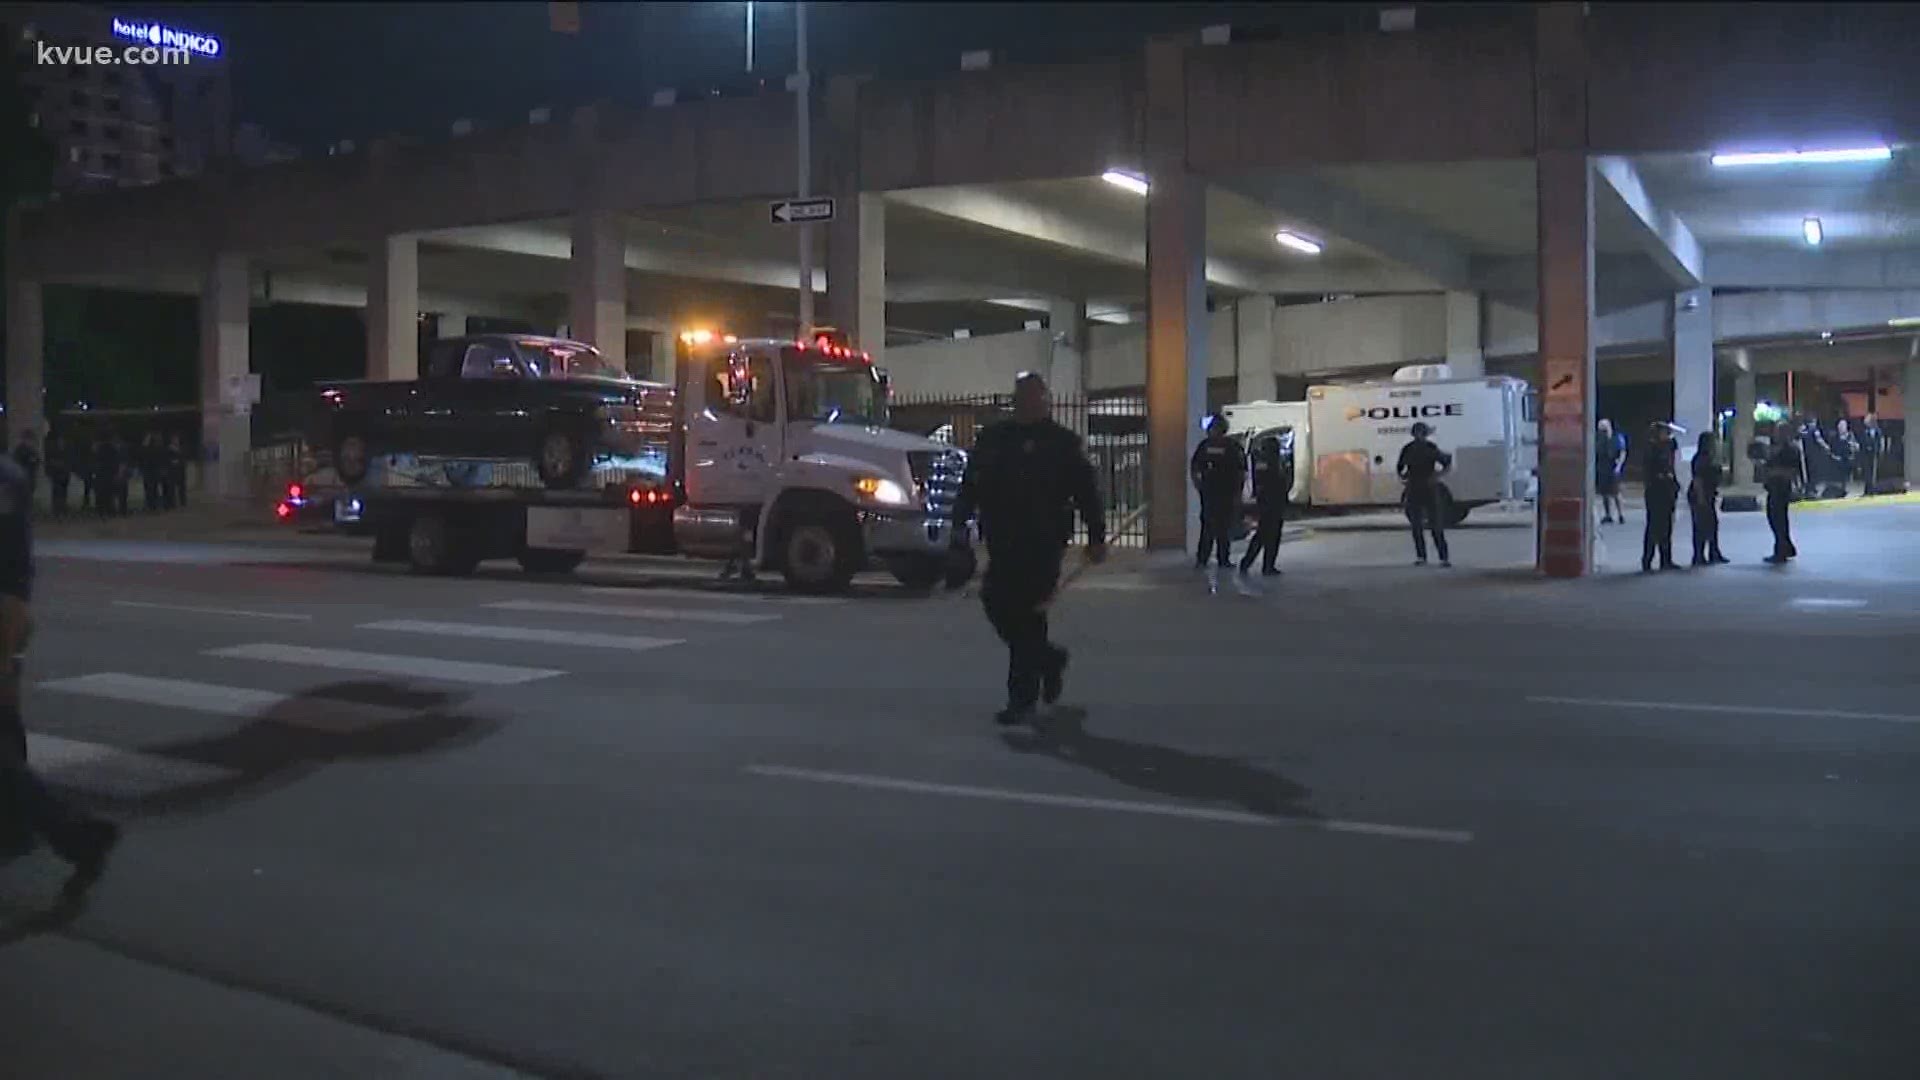 Two separate incidents happened during a peaceful night of protests at APD's headquarters.